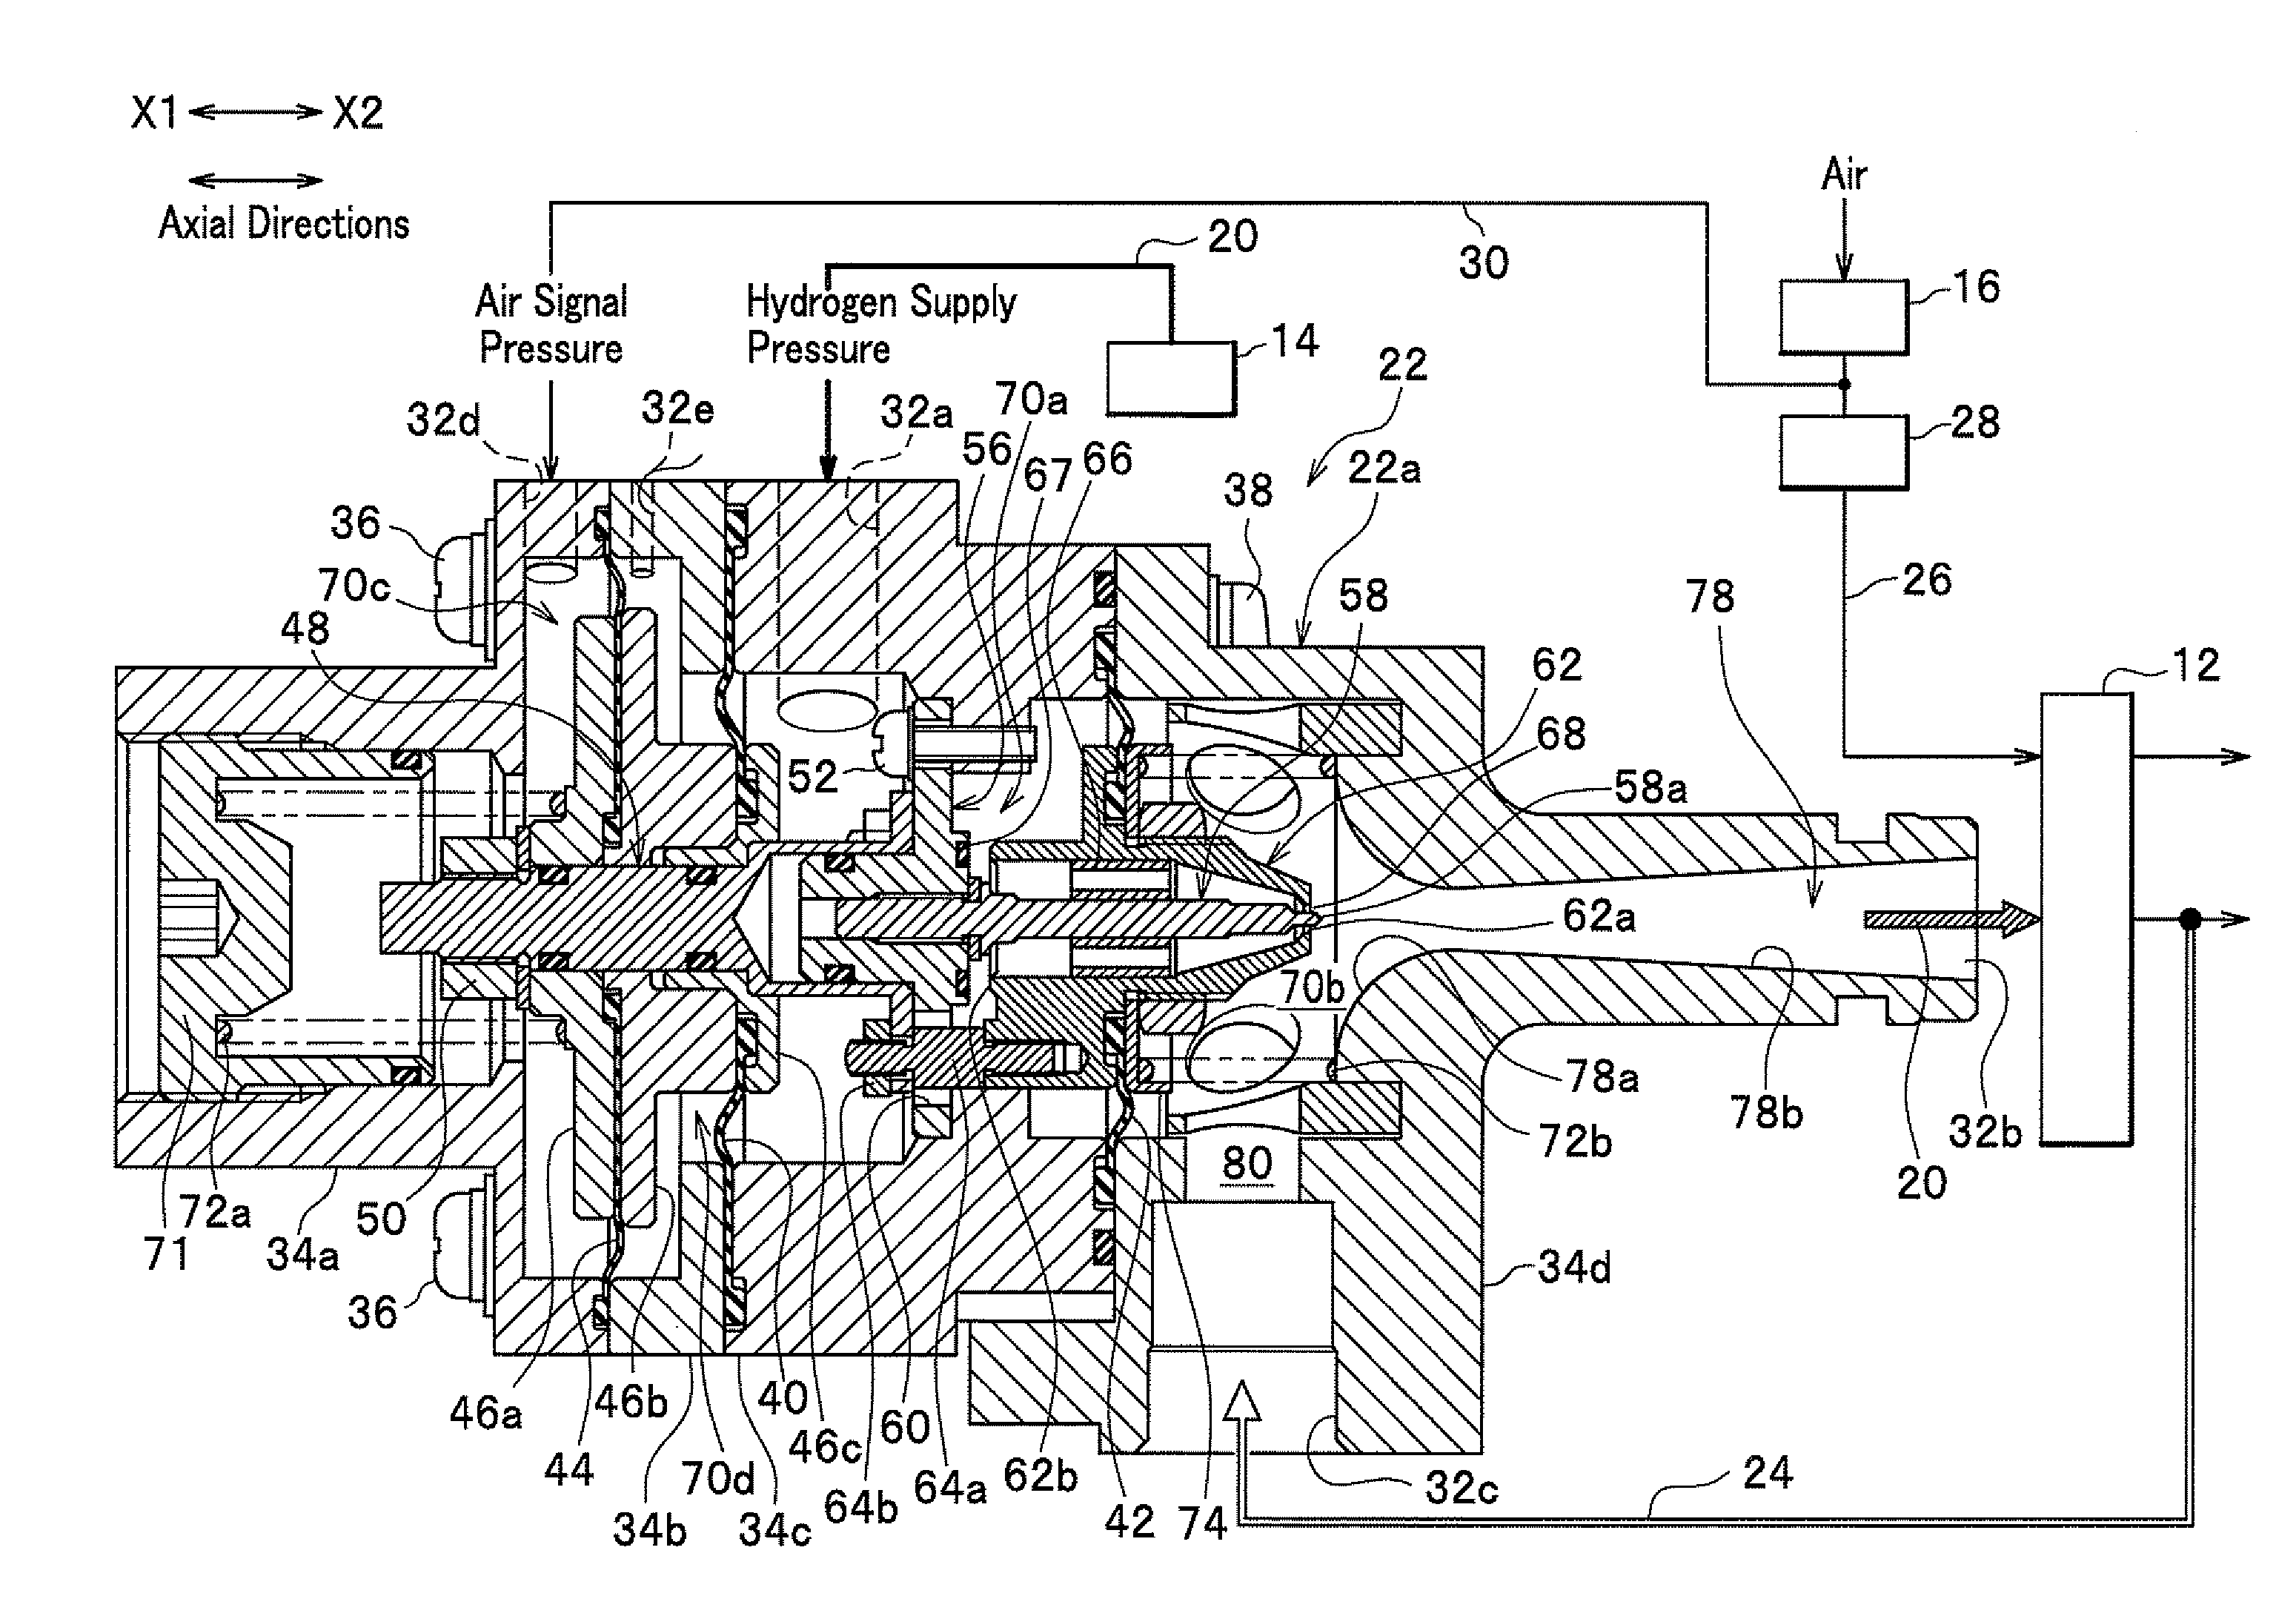 Ejector apparatus for fuel cell